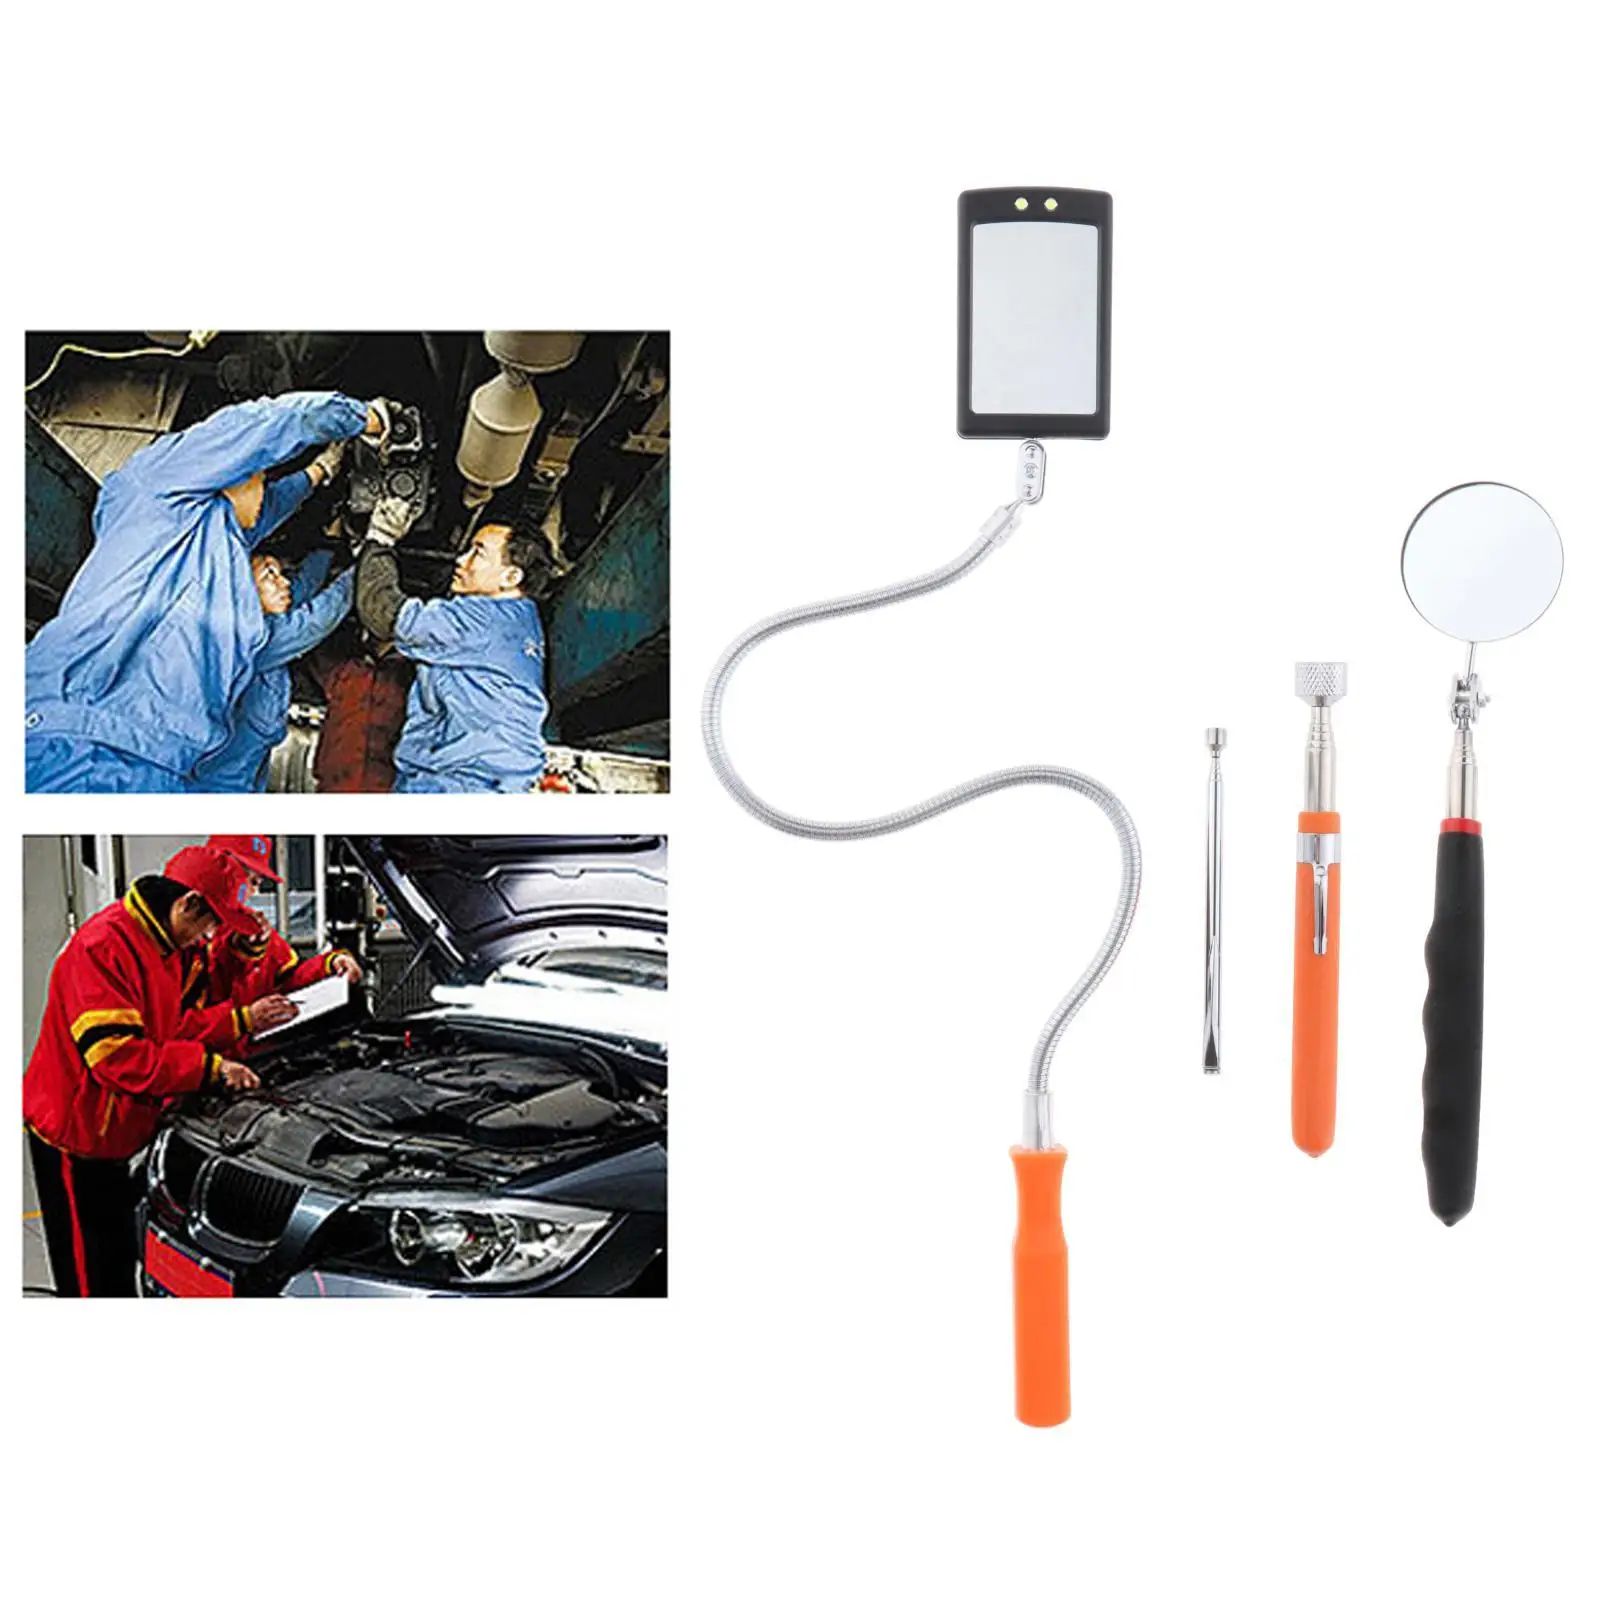  Pick-Up Grabber Tool Auto Repair Detector Fit for Industrial Corners Dentists